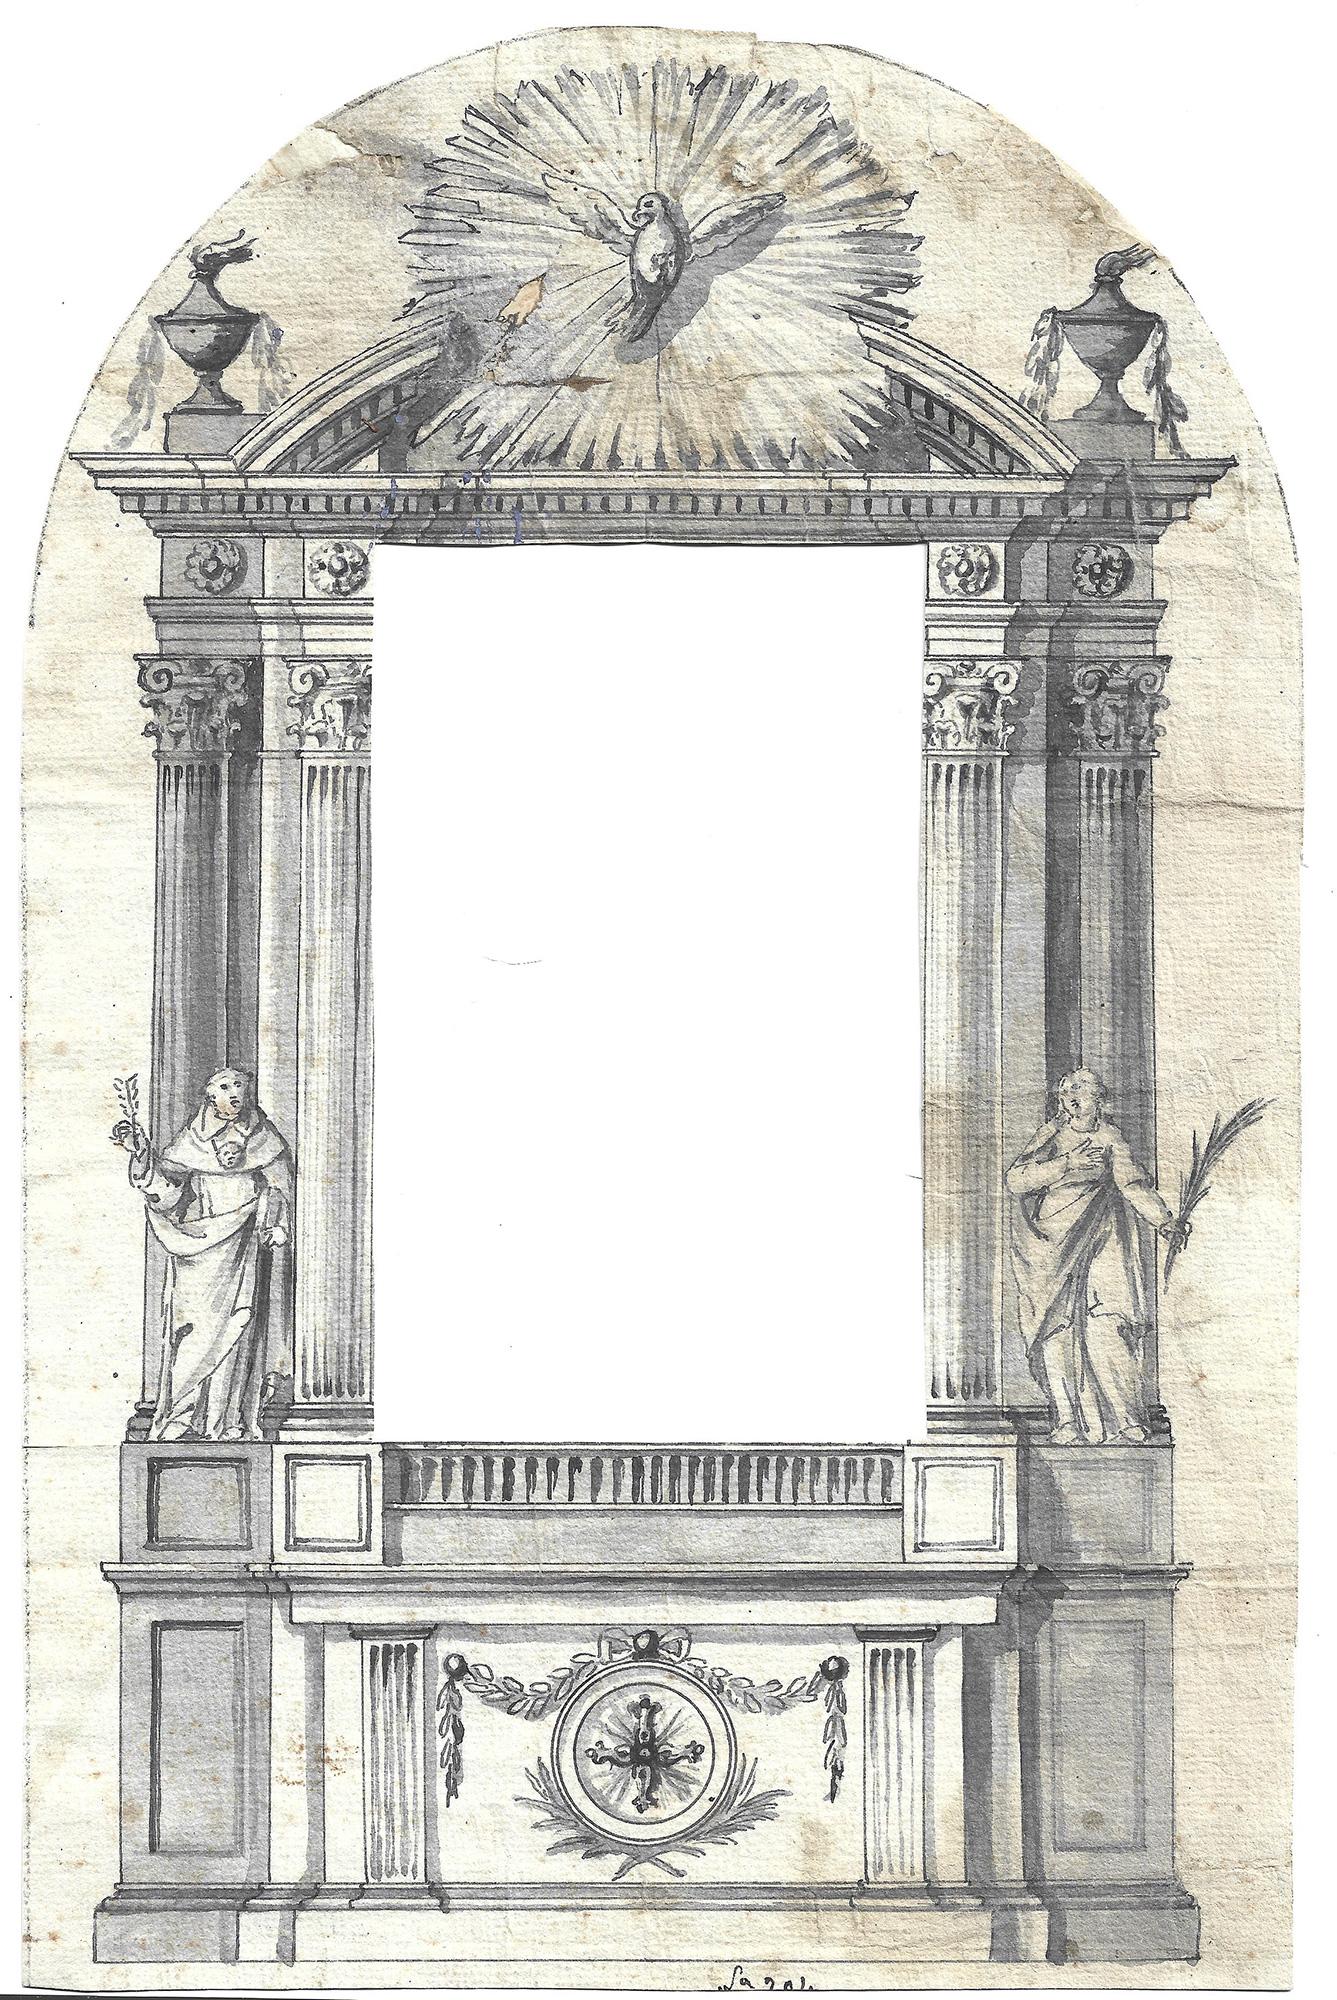 Unknown Interior Art - Design for a large wooden confessional from the Santoni Workshop